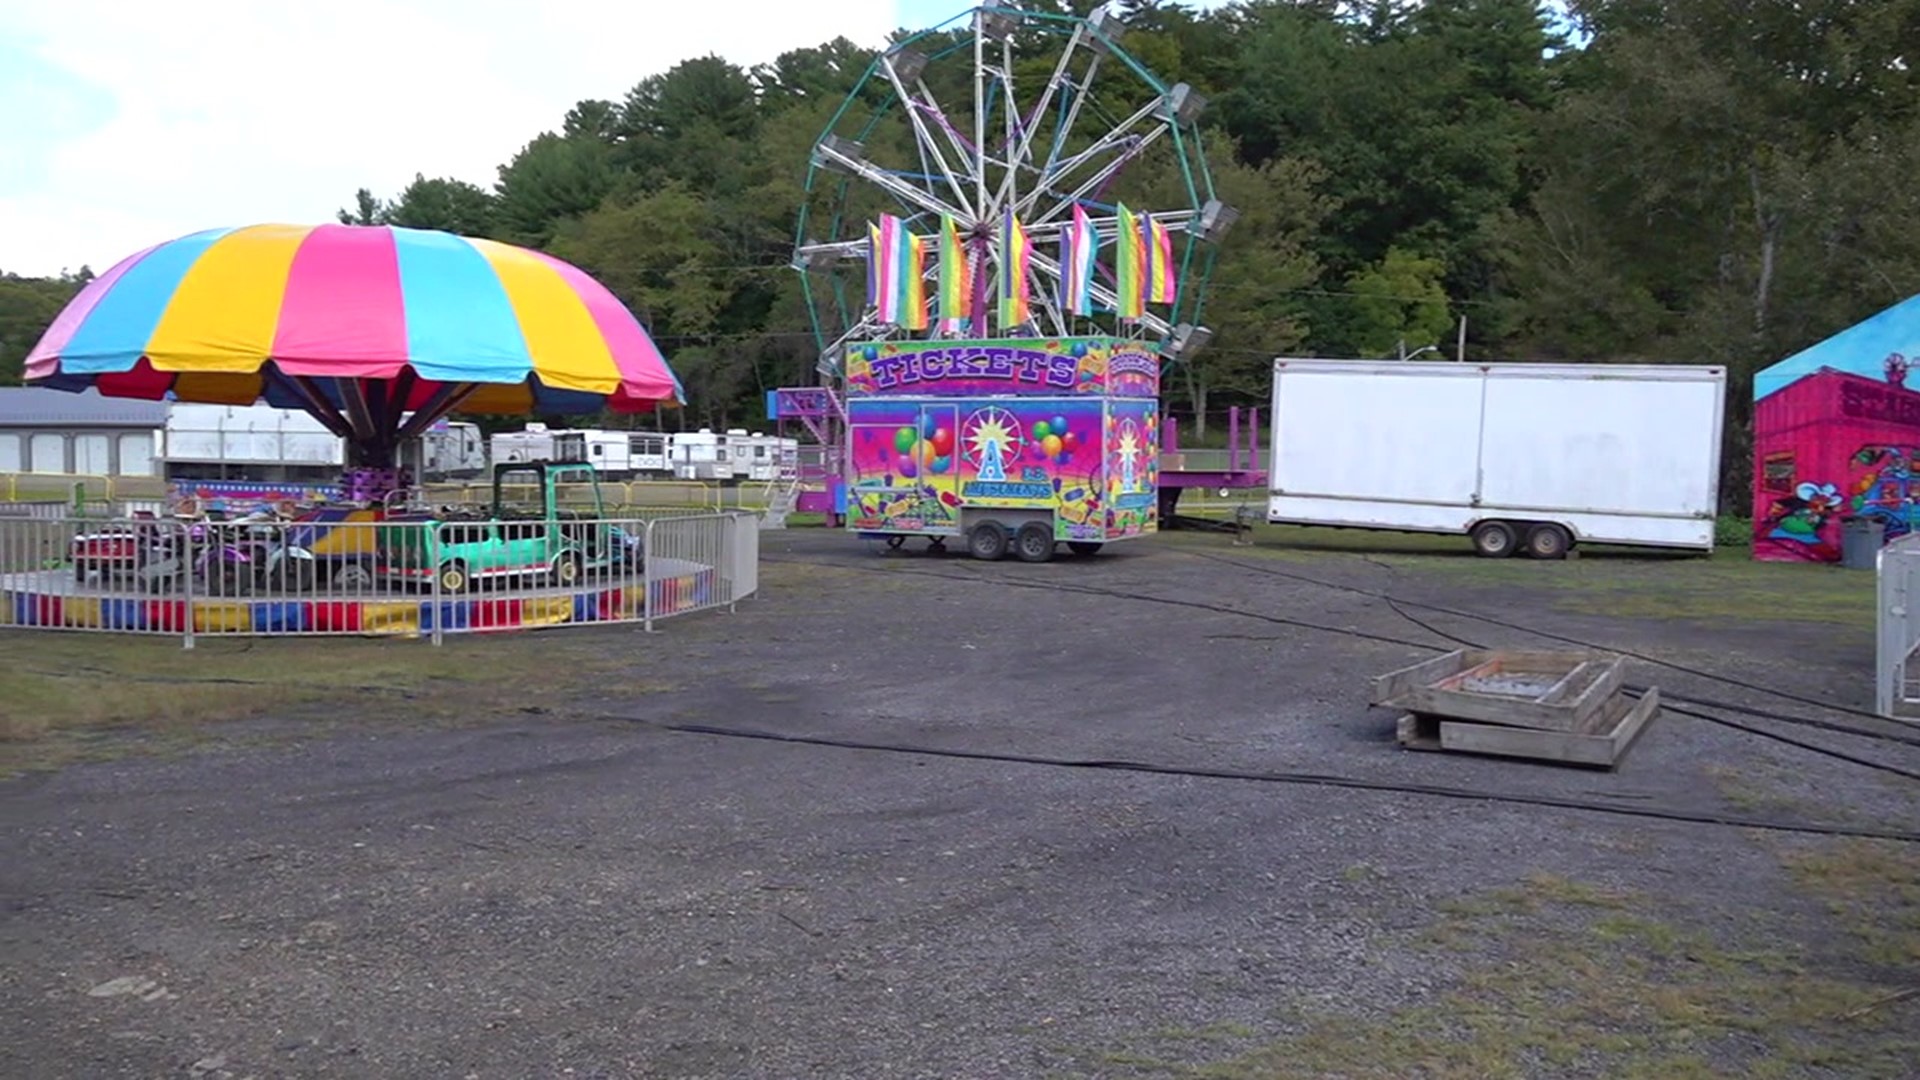 Opening night for the first annual Fireman’s Carnival Fundraiser in Llewellyn plans to keep people coming back.